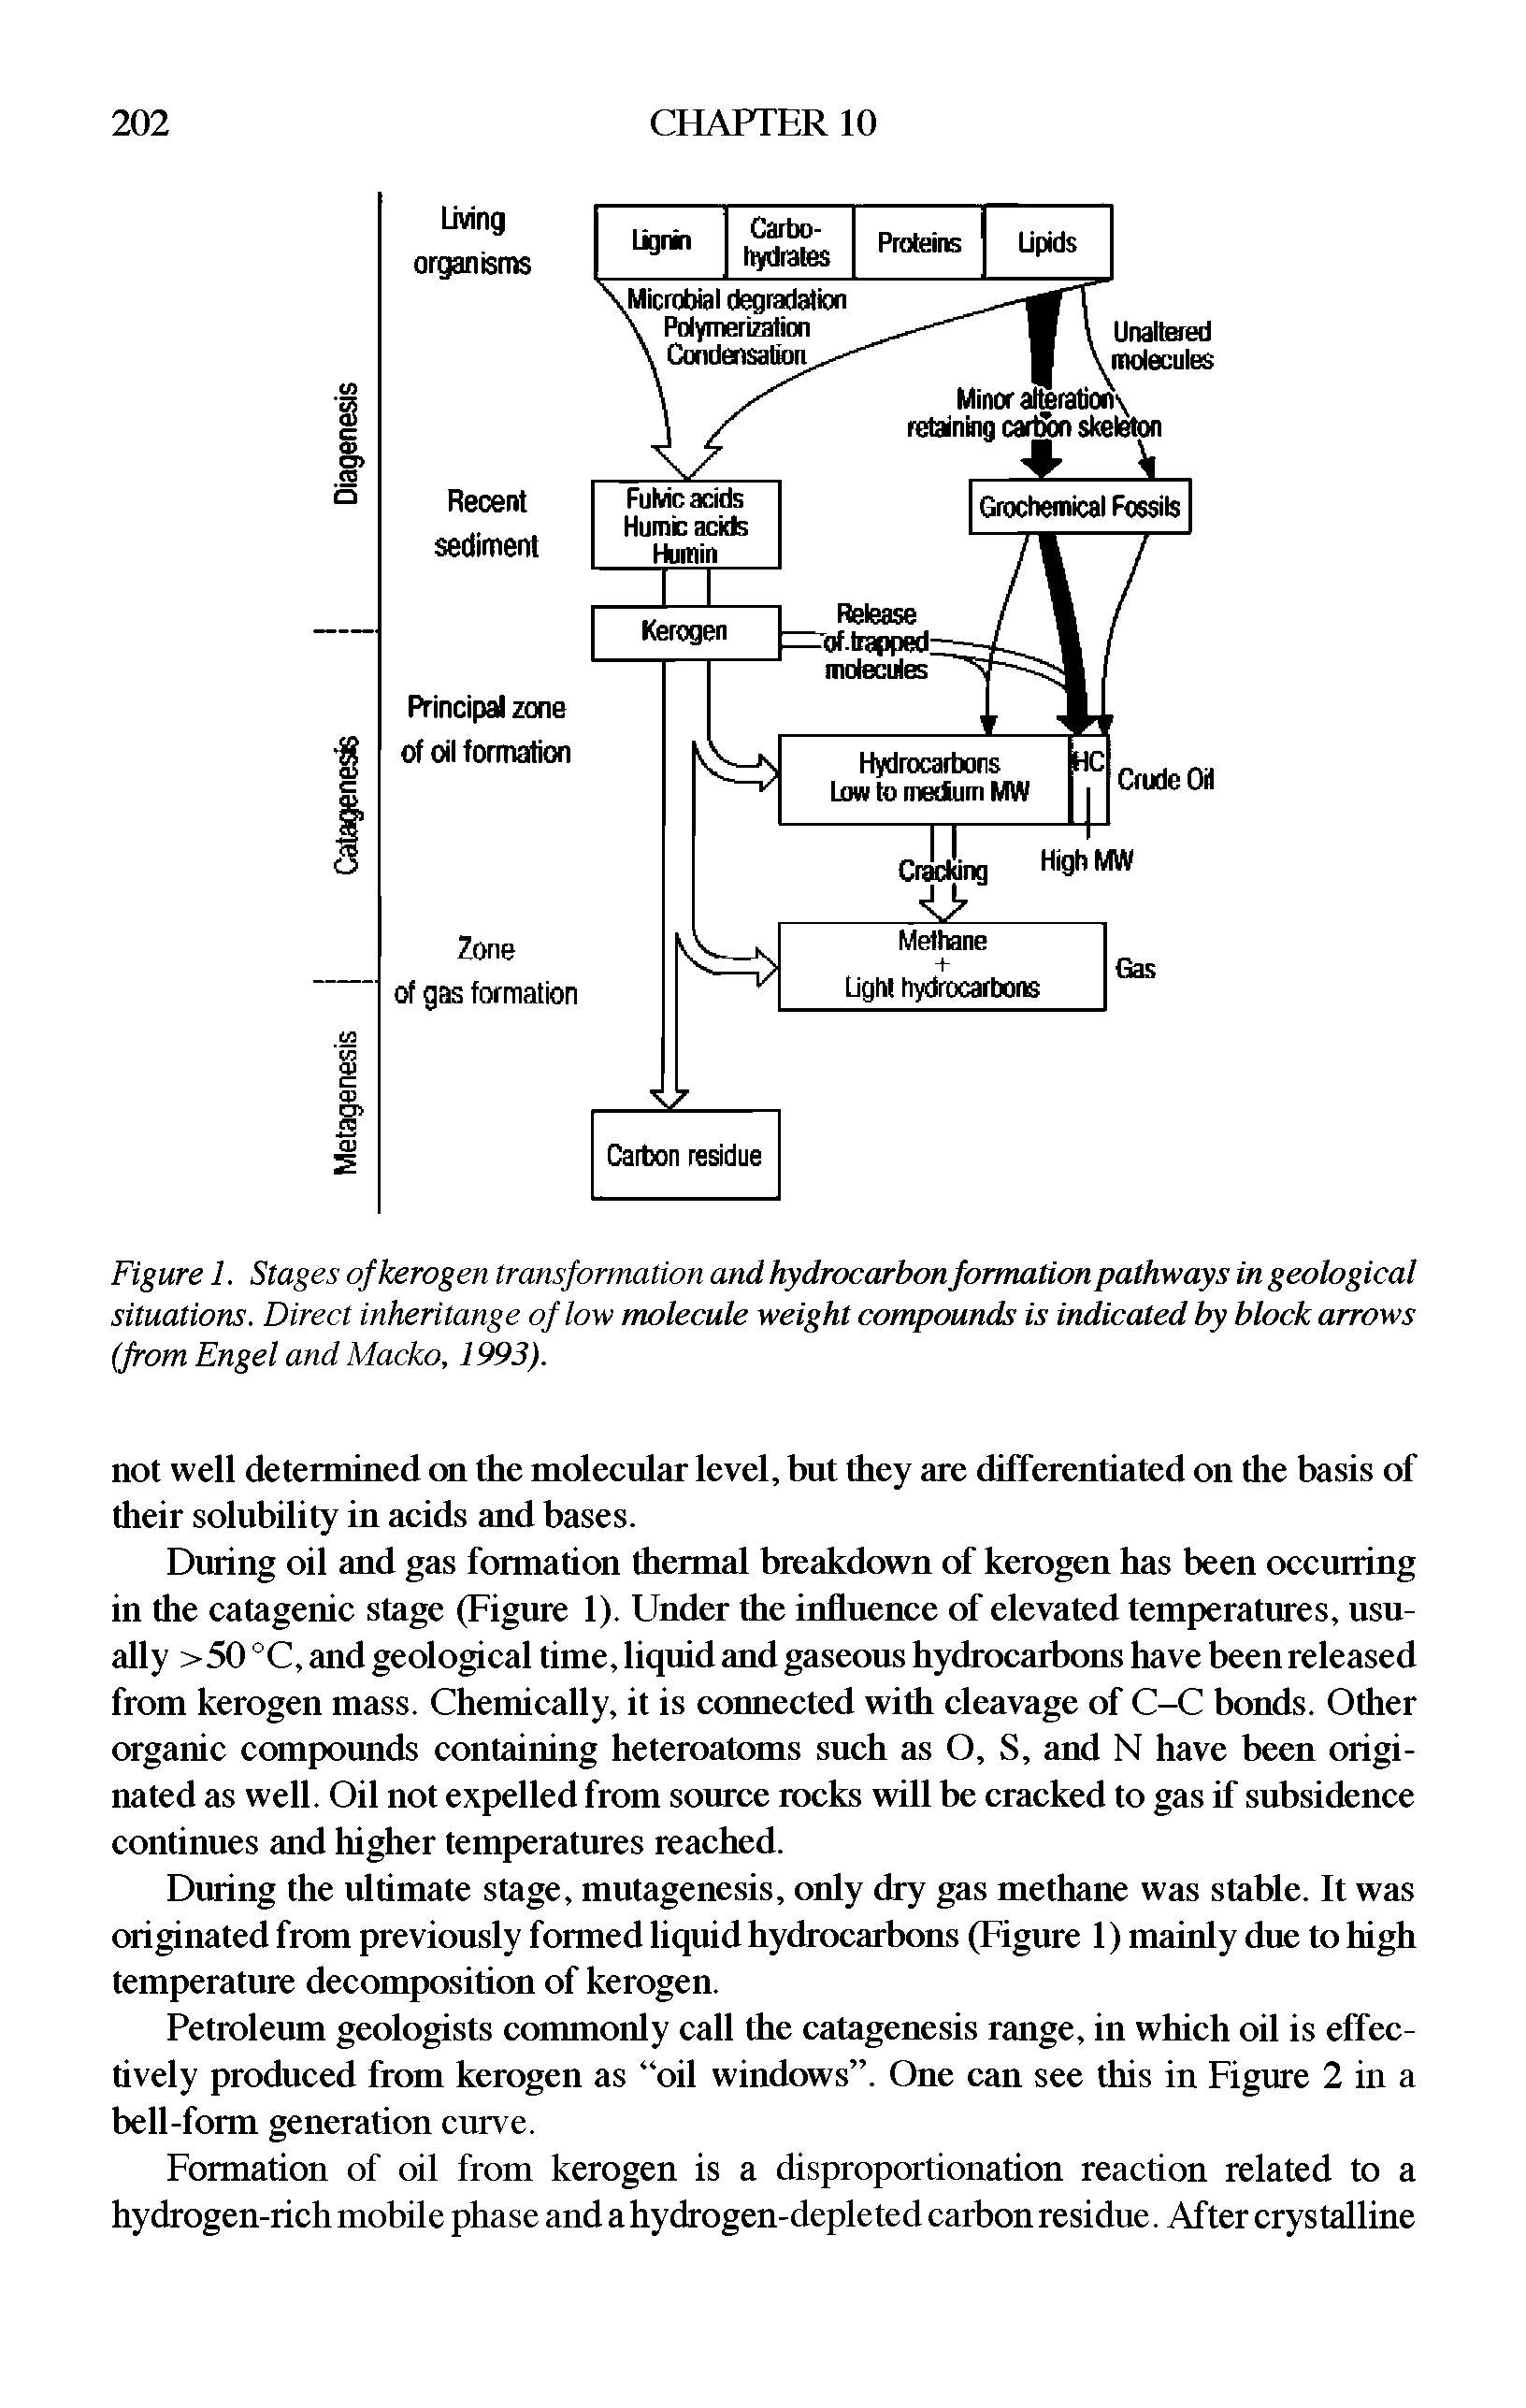 Figure 1. Stages of kerogen transformation and hydrocarbon formation pathways in geological situations. Direct inheritange of low molecule weight compounds is indicated by block arrows (from Engel and Macko, 1993).